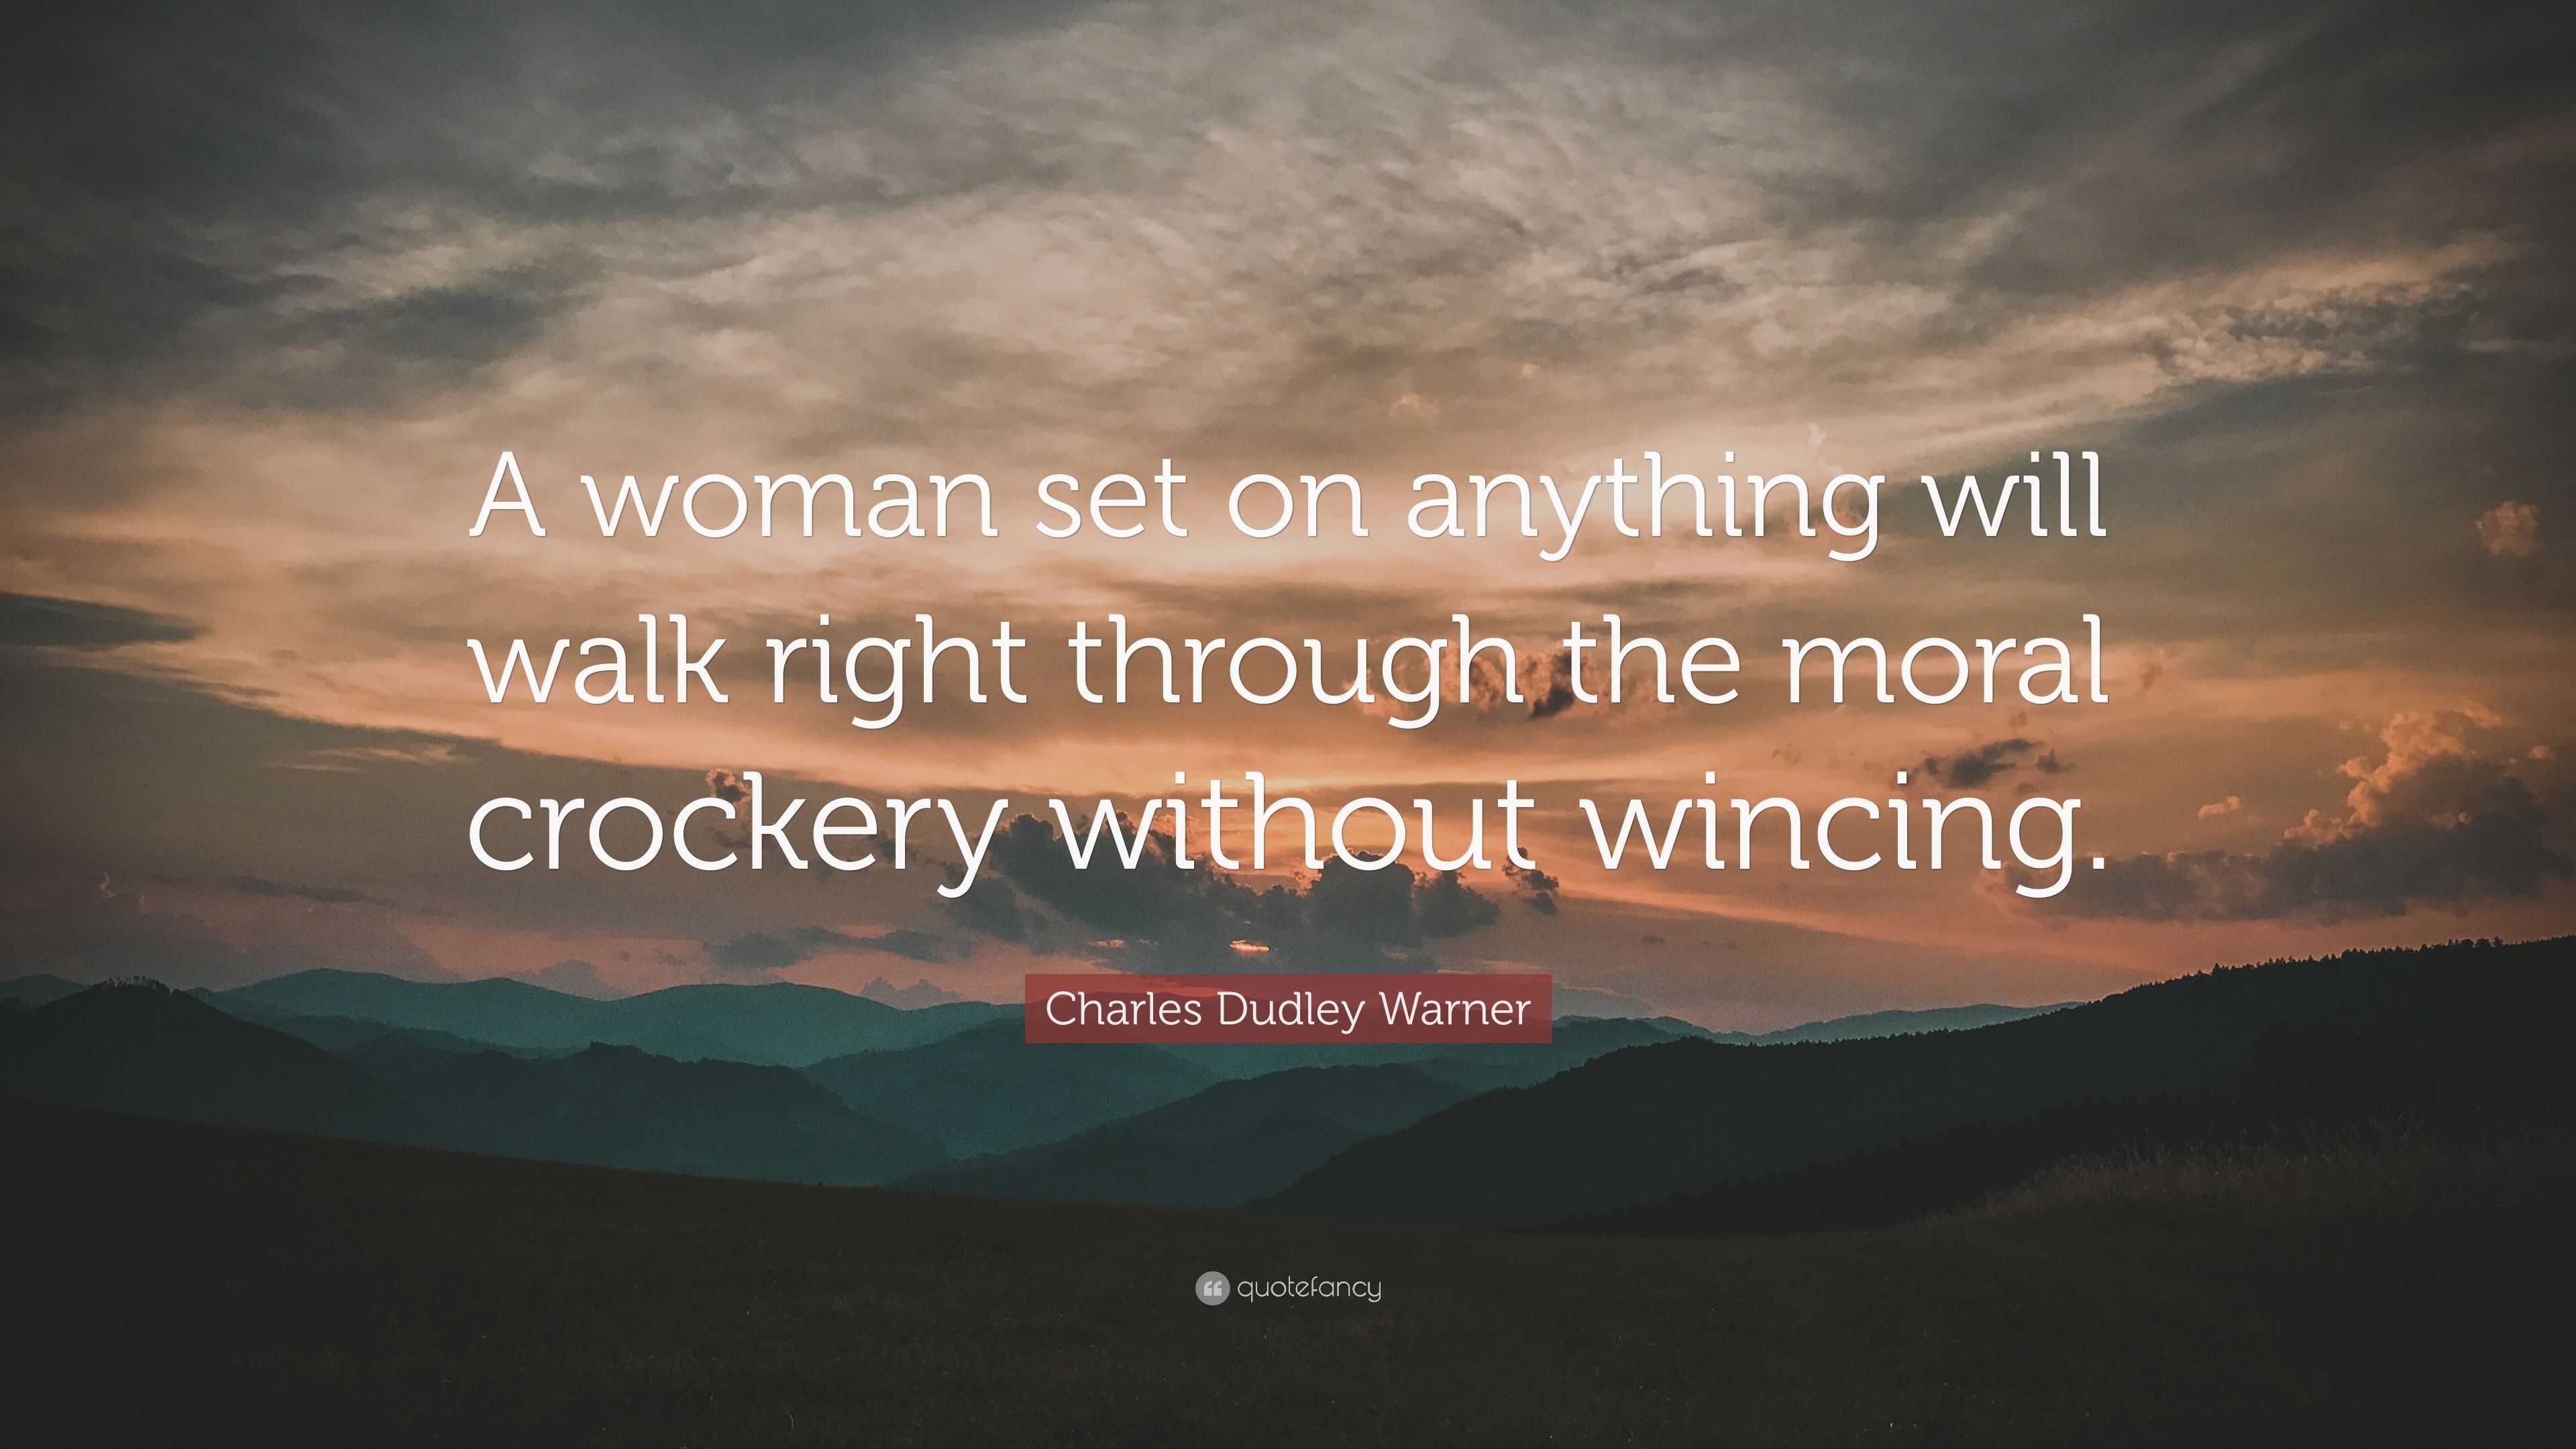 Charles Dudley Warner Quote: “A woman set on anything will walk right ...